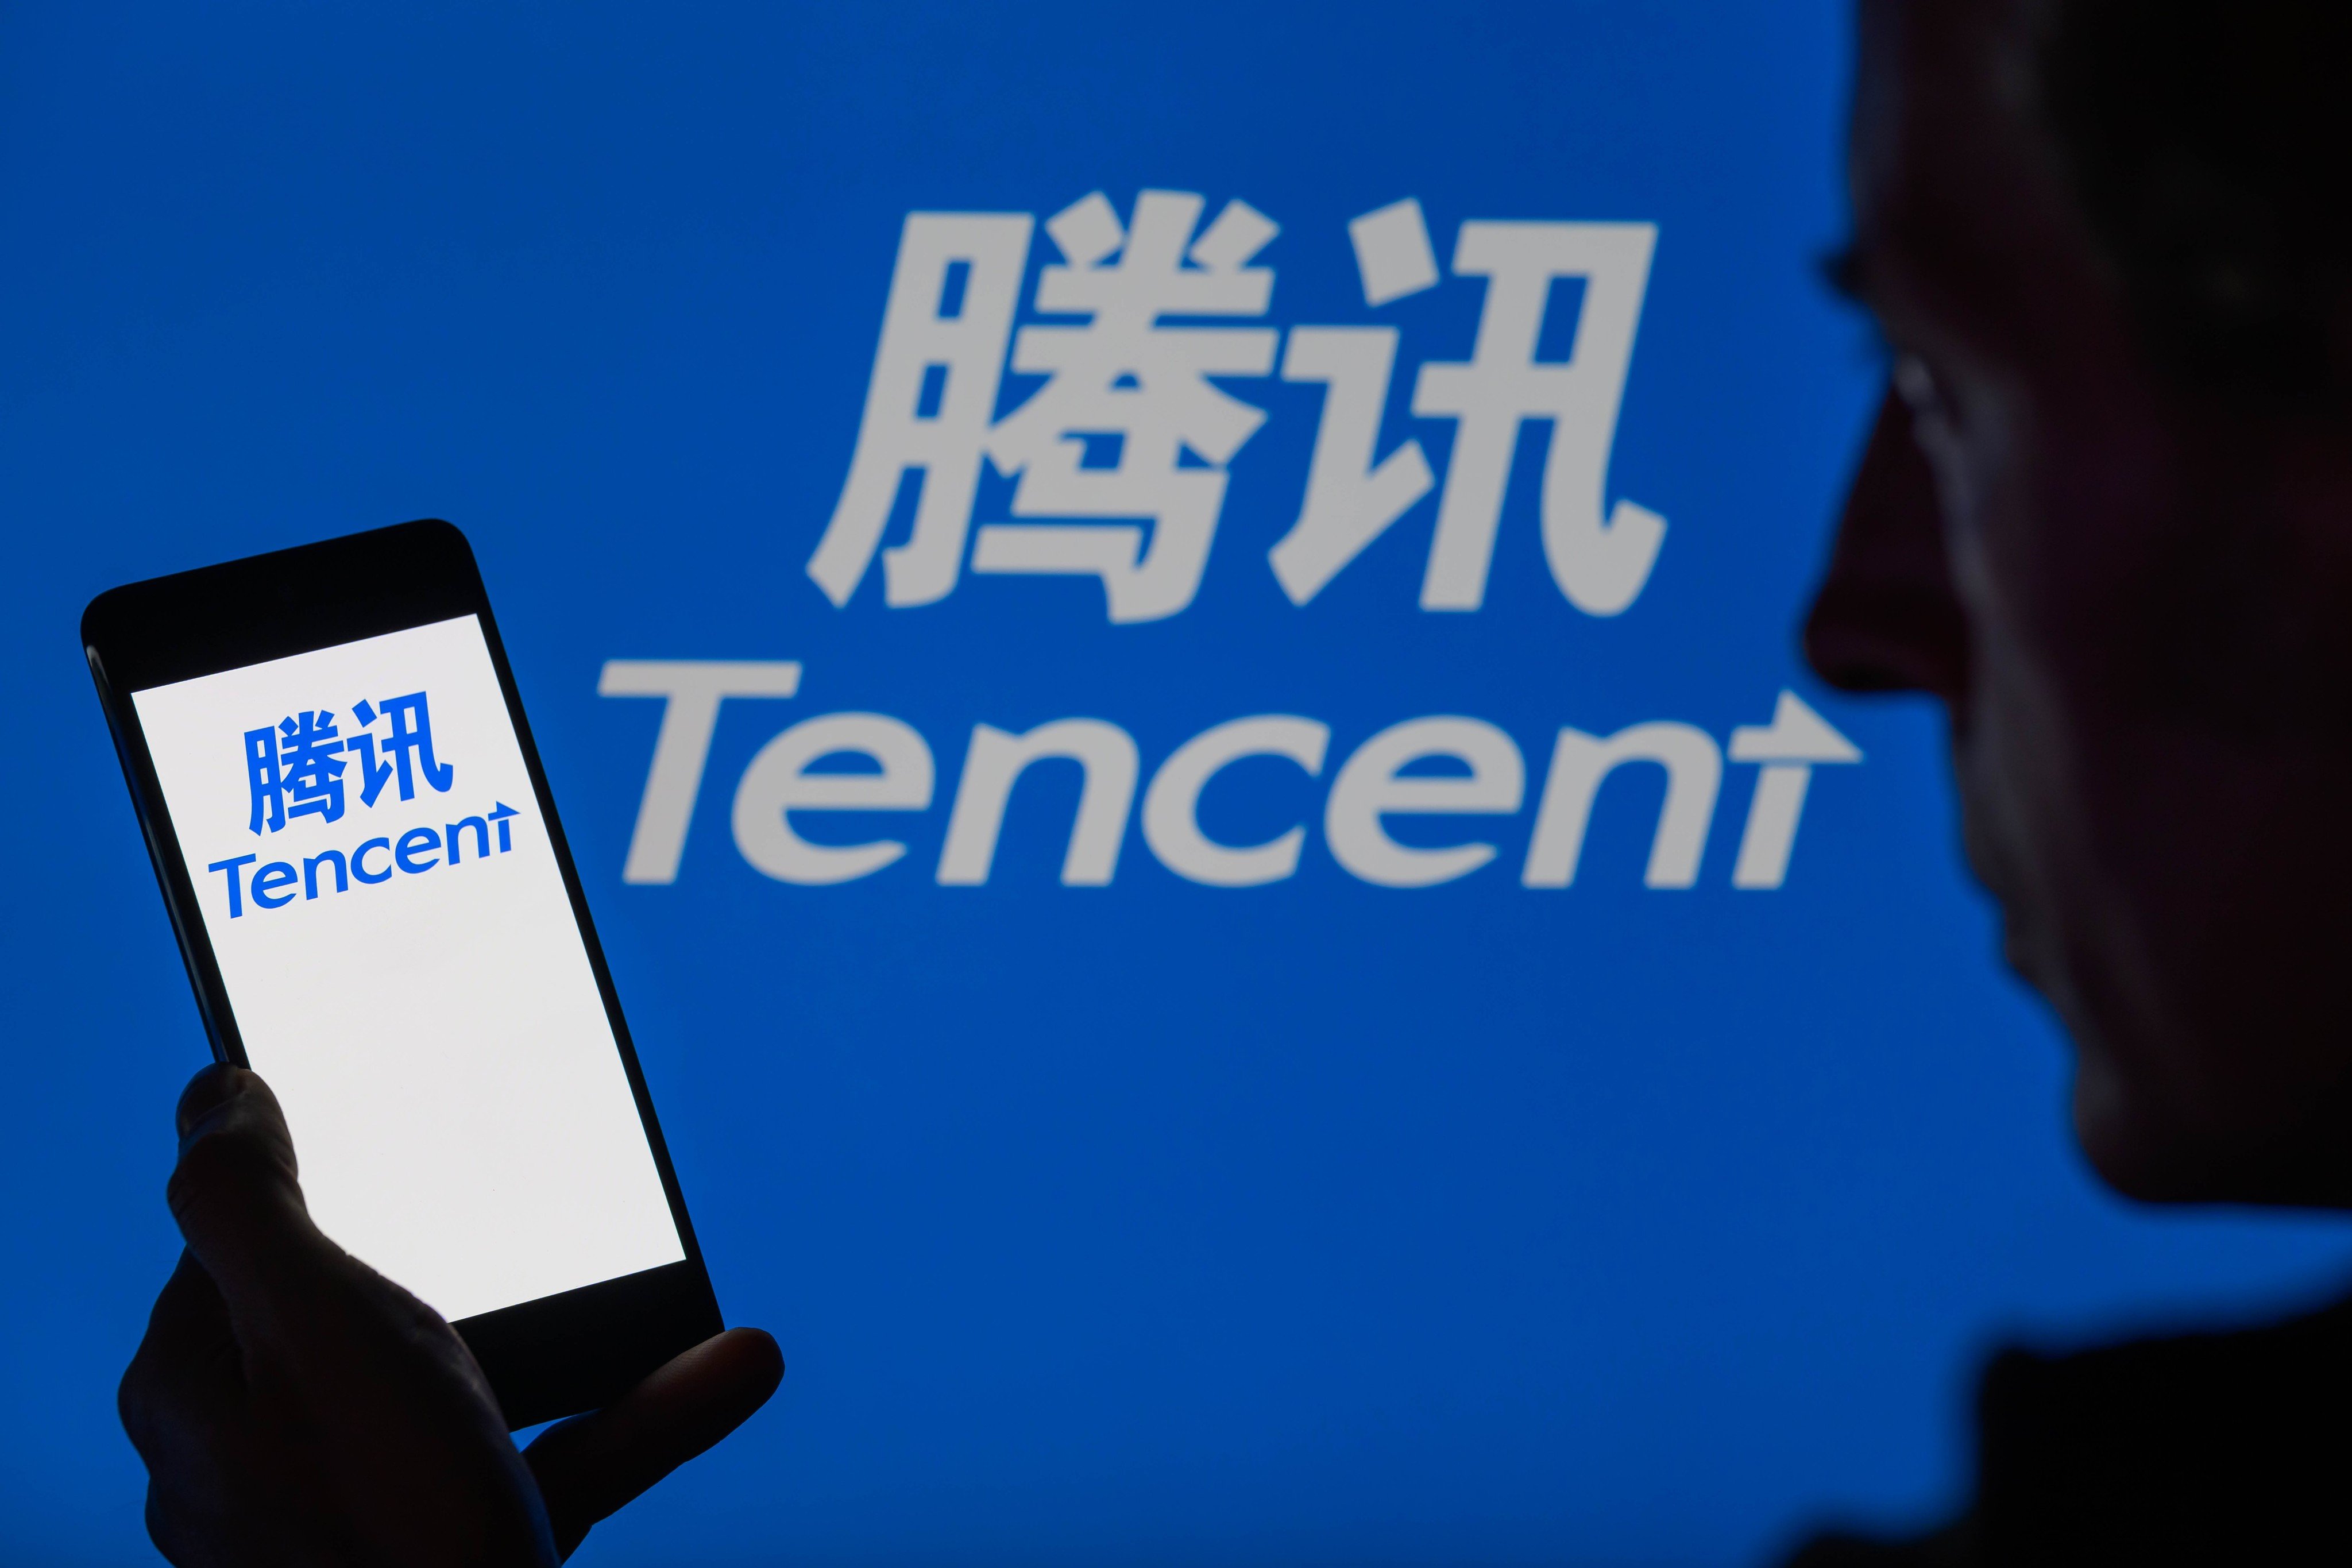 Tencent’s cost-cutting efforts have included divesting some of its investment portfolio, closing noncore businesses, and consolidating its sprawling operations in social media, video gaming and other market segments. Photo: Shutterstock